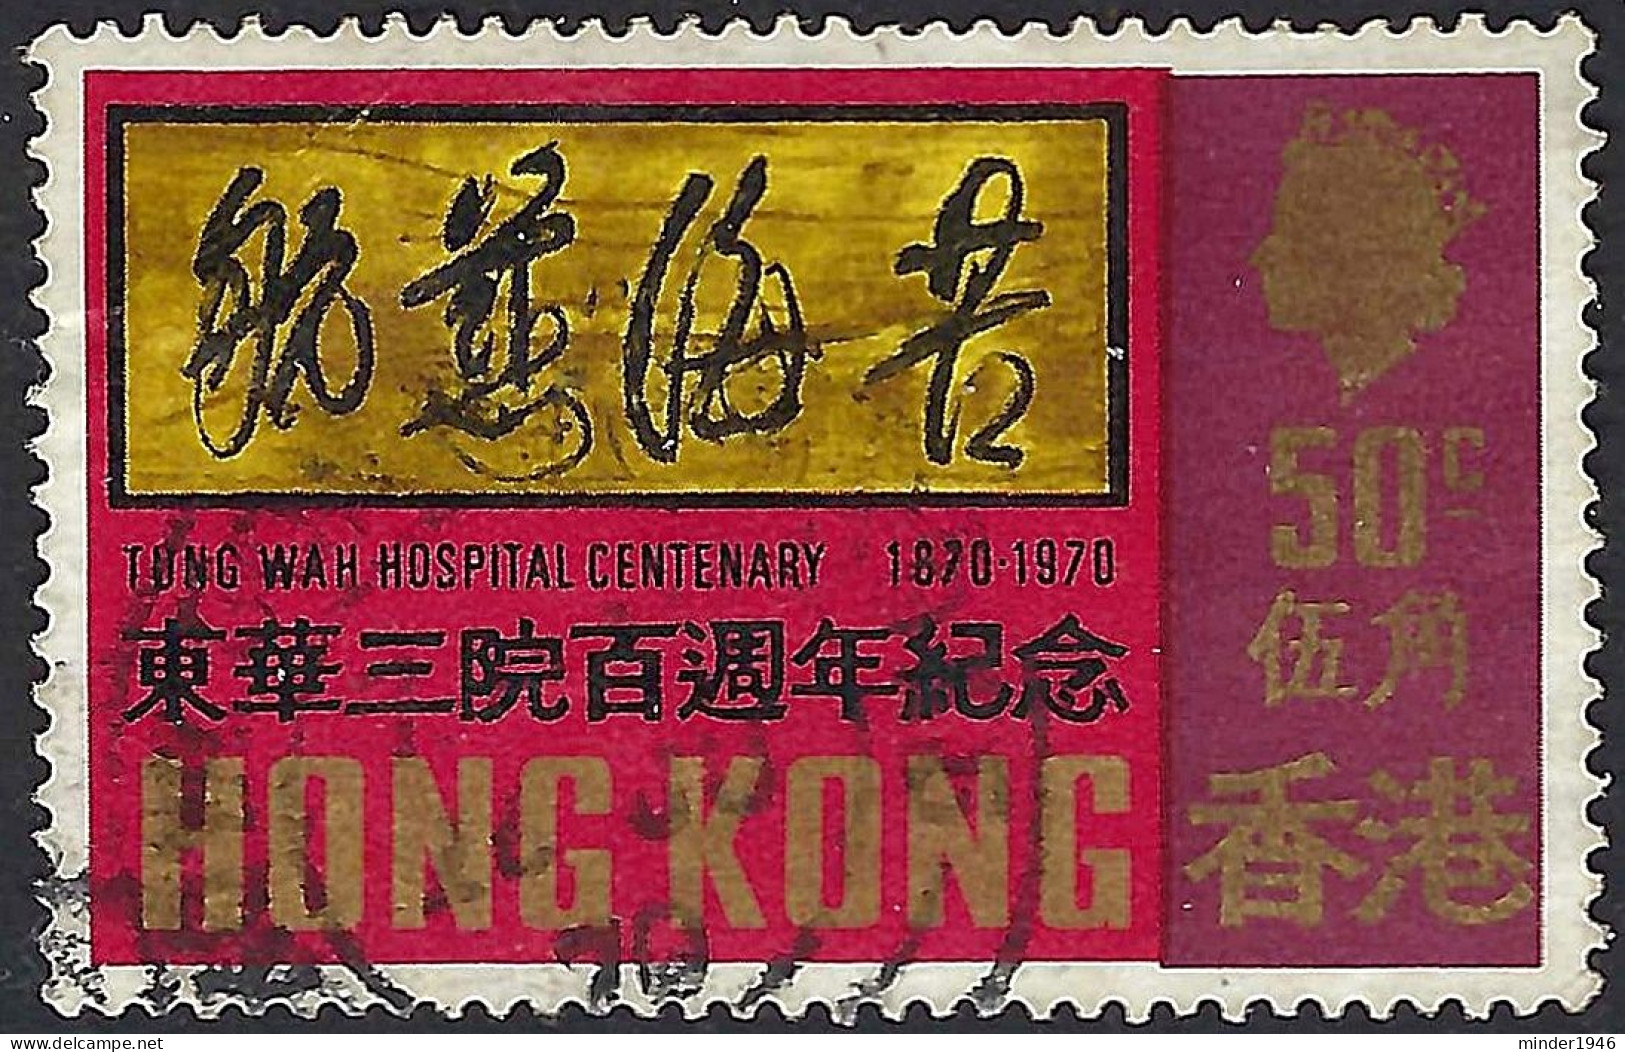 HONG KONG 1970 QEII 50c Multicoloured, Centenary Of Tung Wah Hospital SG266 Used - Used Stamps